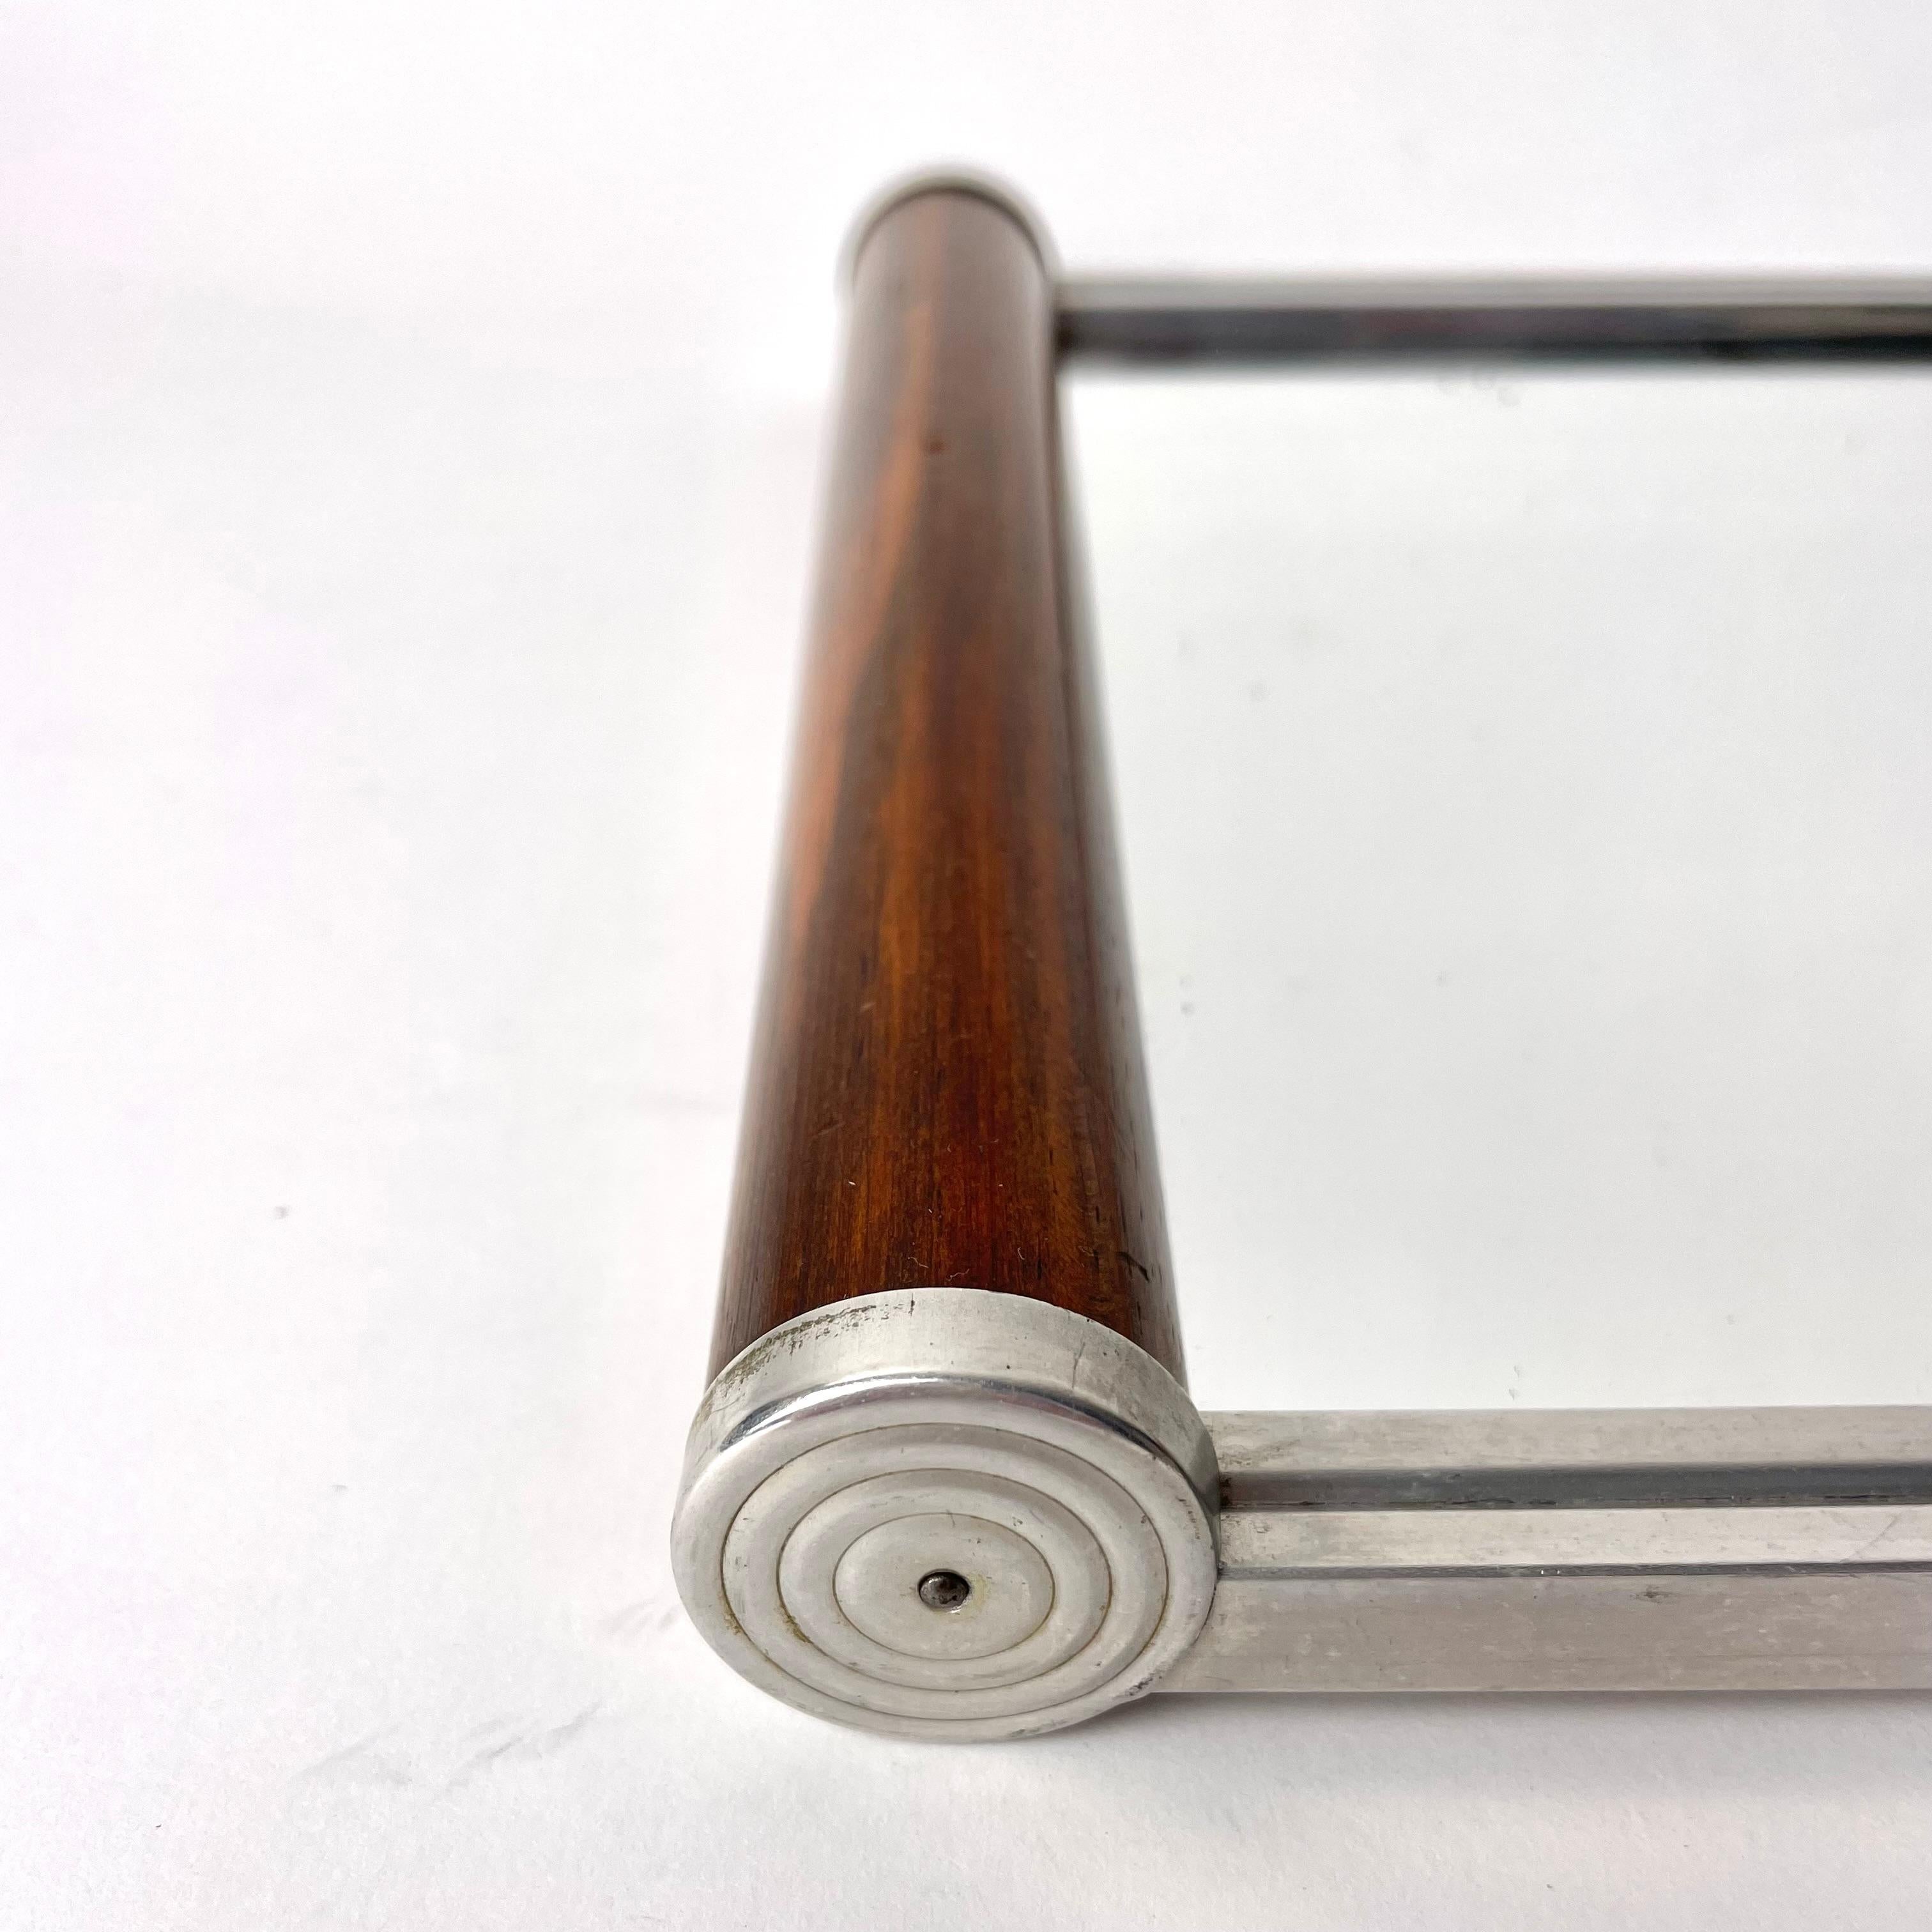 European Art Deco Mirror Tray in Walnut and White Metal, 1920s For Sale